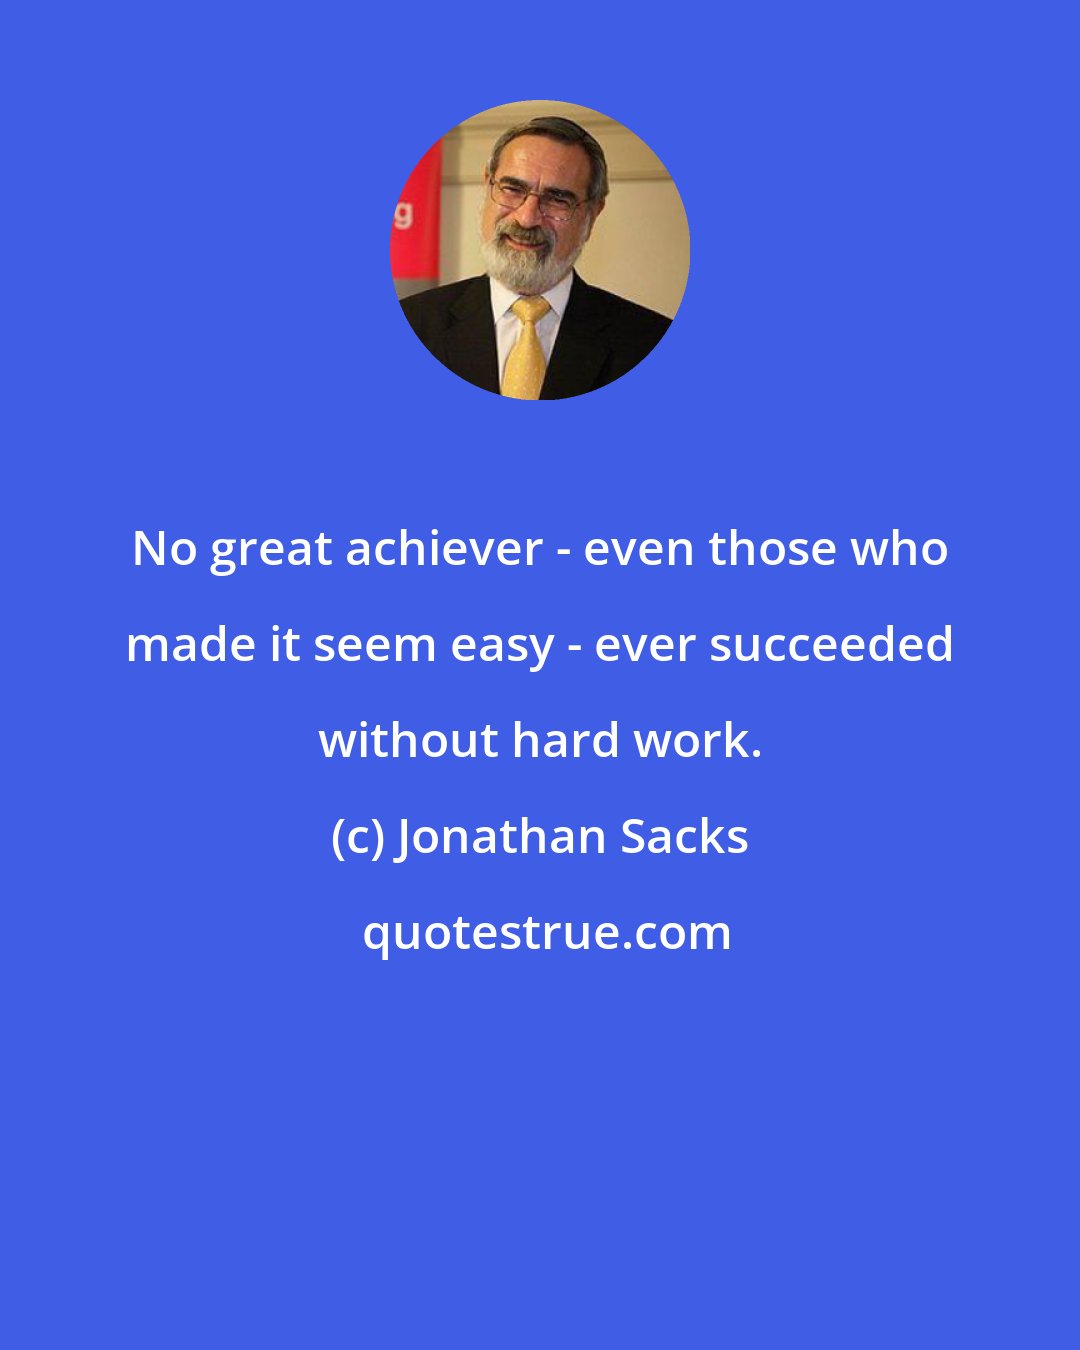 Jonathan Sacks: No great achiever - even those who made it seem easy - ever succeeded without hard work.